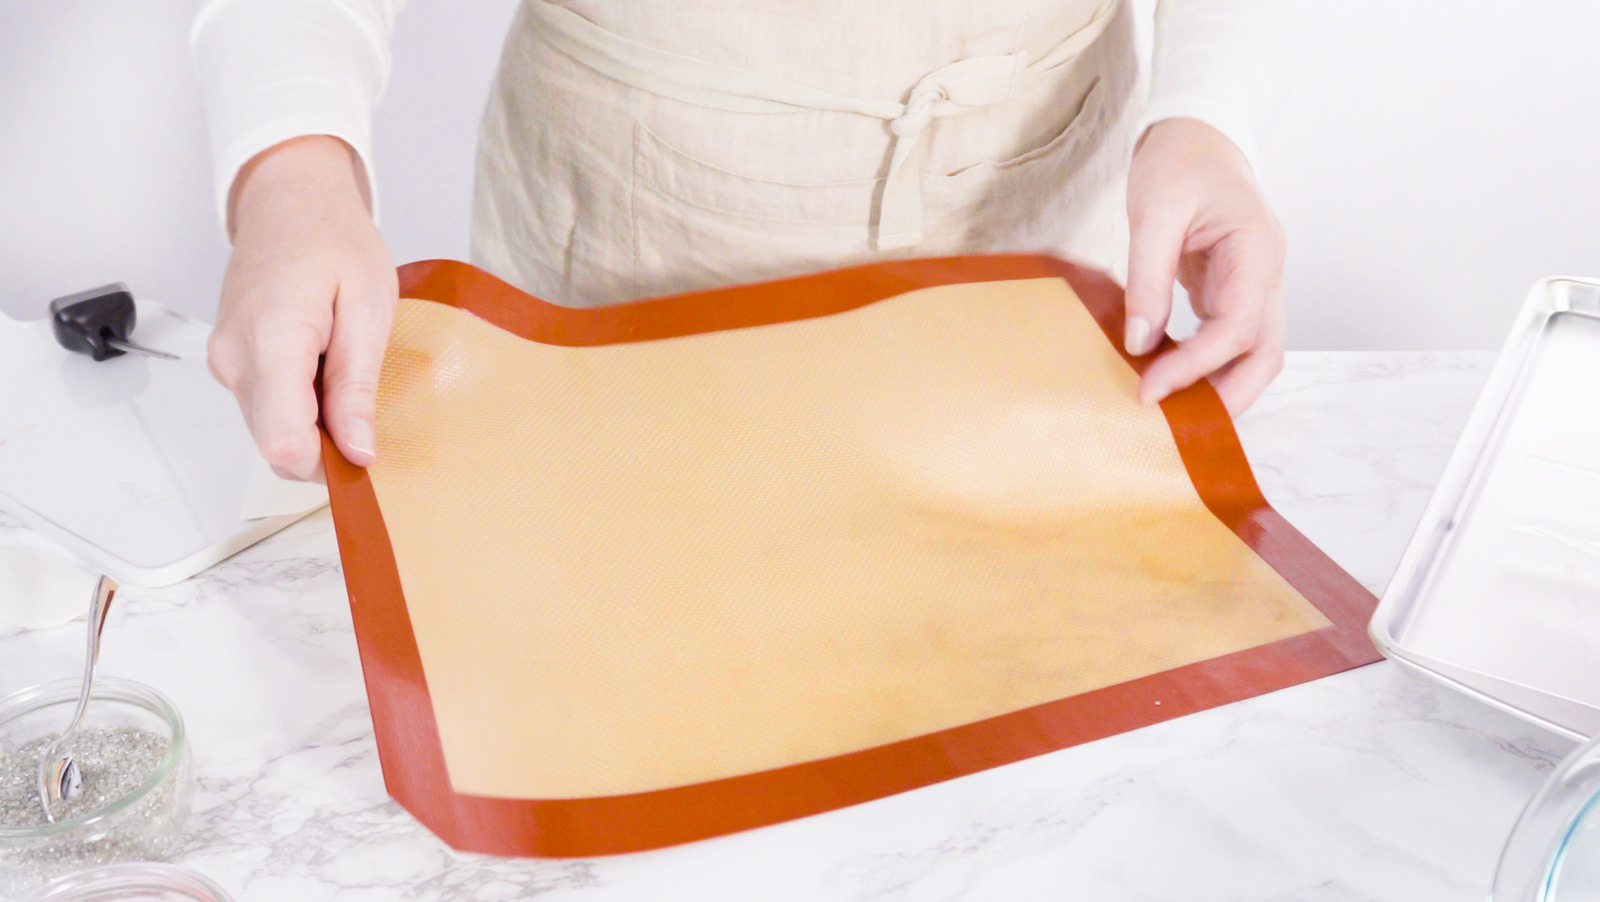 https://www.tastingtable.com/img/gallery/leave-your-silicone-baking-mat-in-the-oven-for-easy-clean-up/l-intro-1677178864.jpg